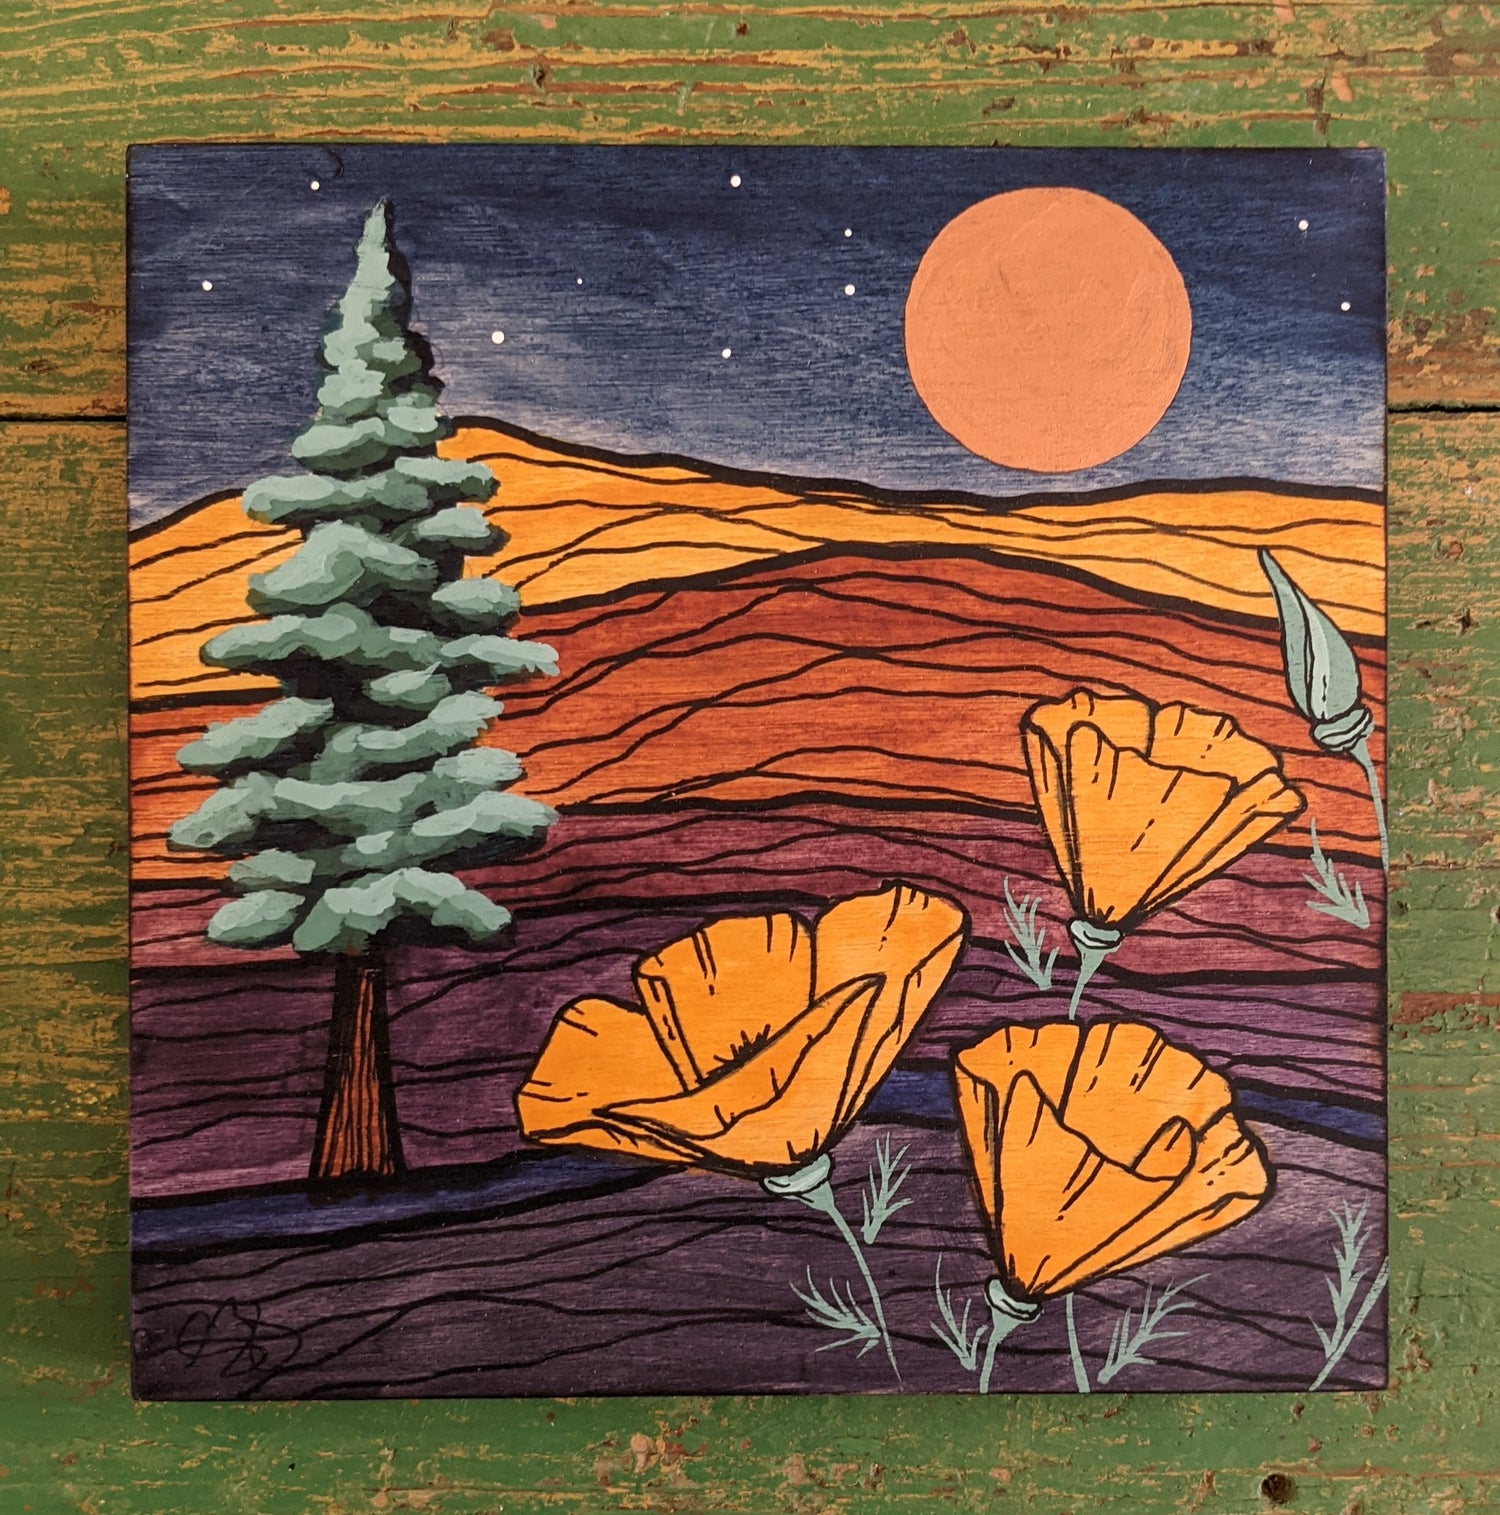 Mountain scene with redwood and poppies in full moon painting, by Skavenge Art